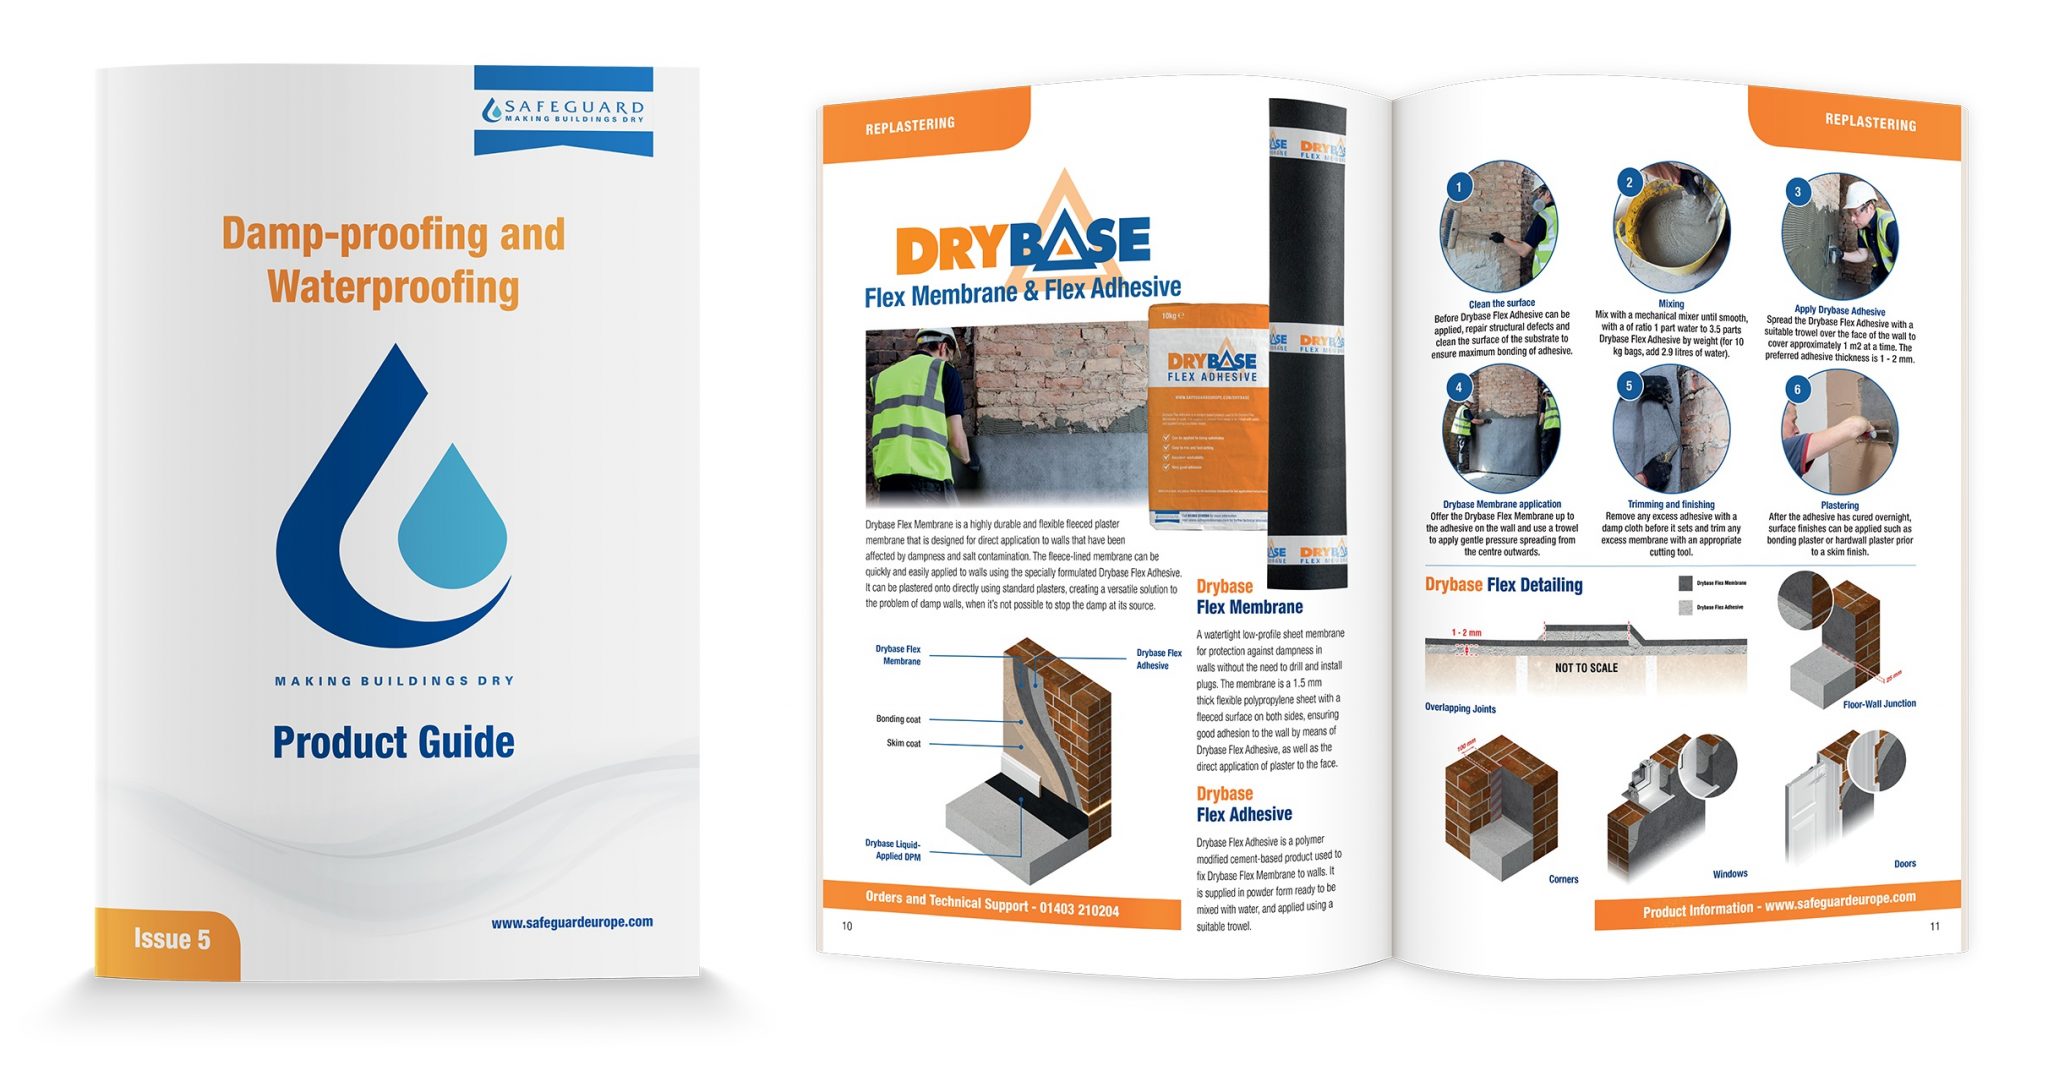 Access Safeguard’s Damp and Waterproofing Technology in One Handy Volume